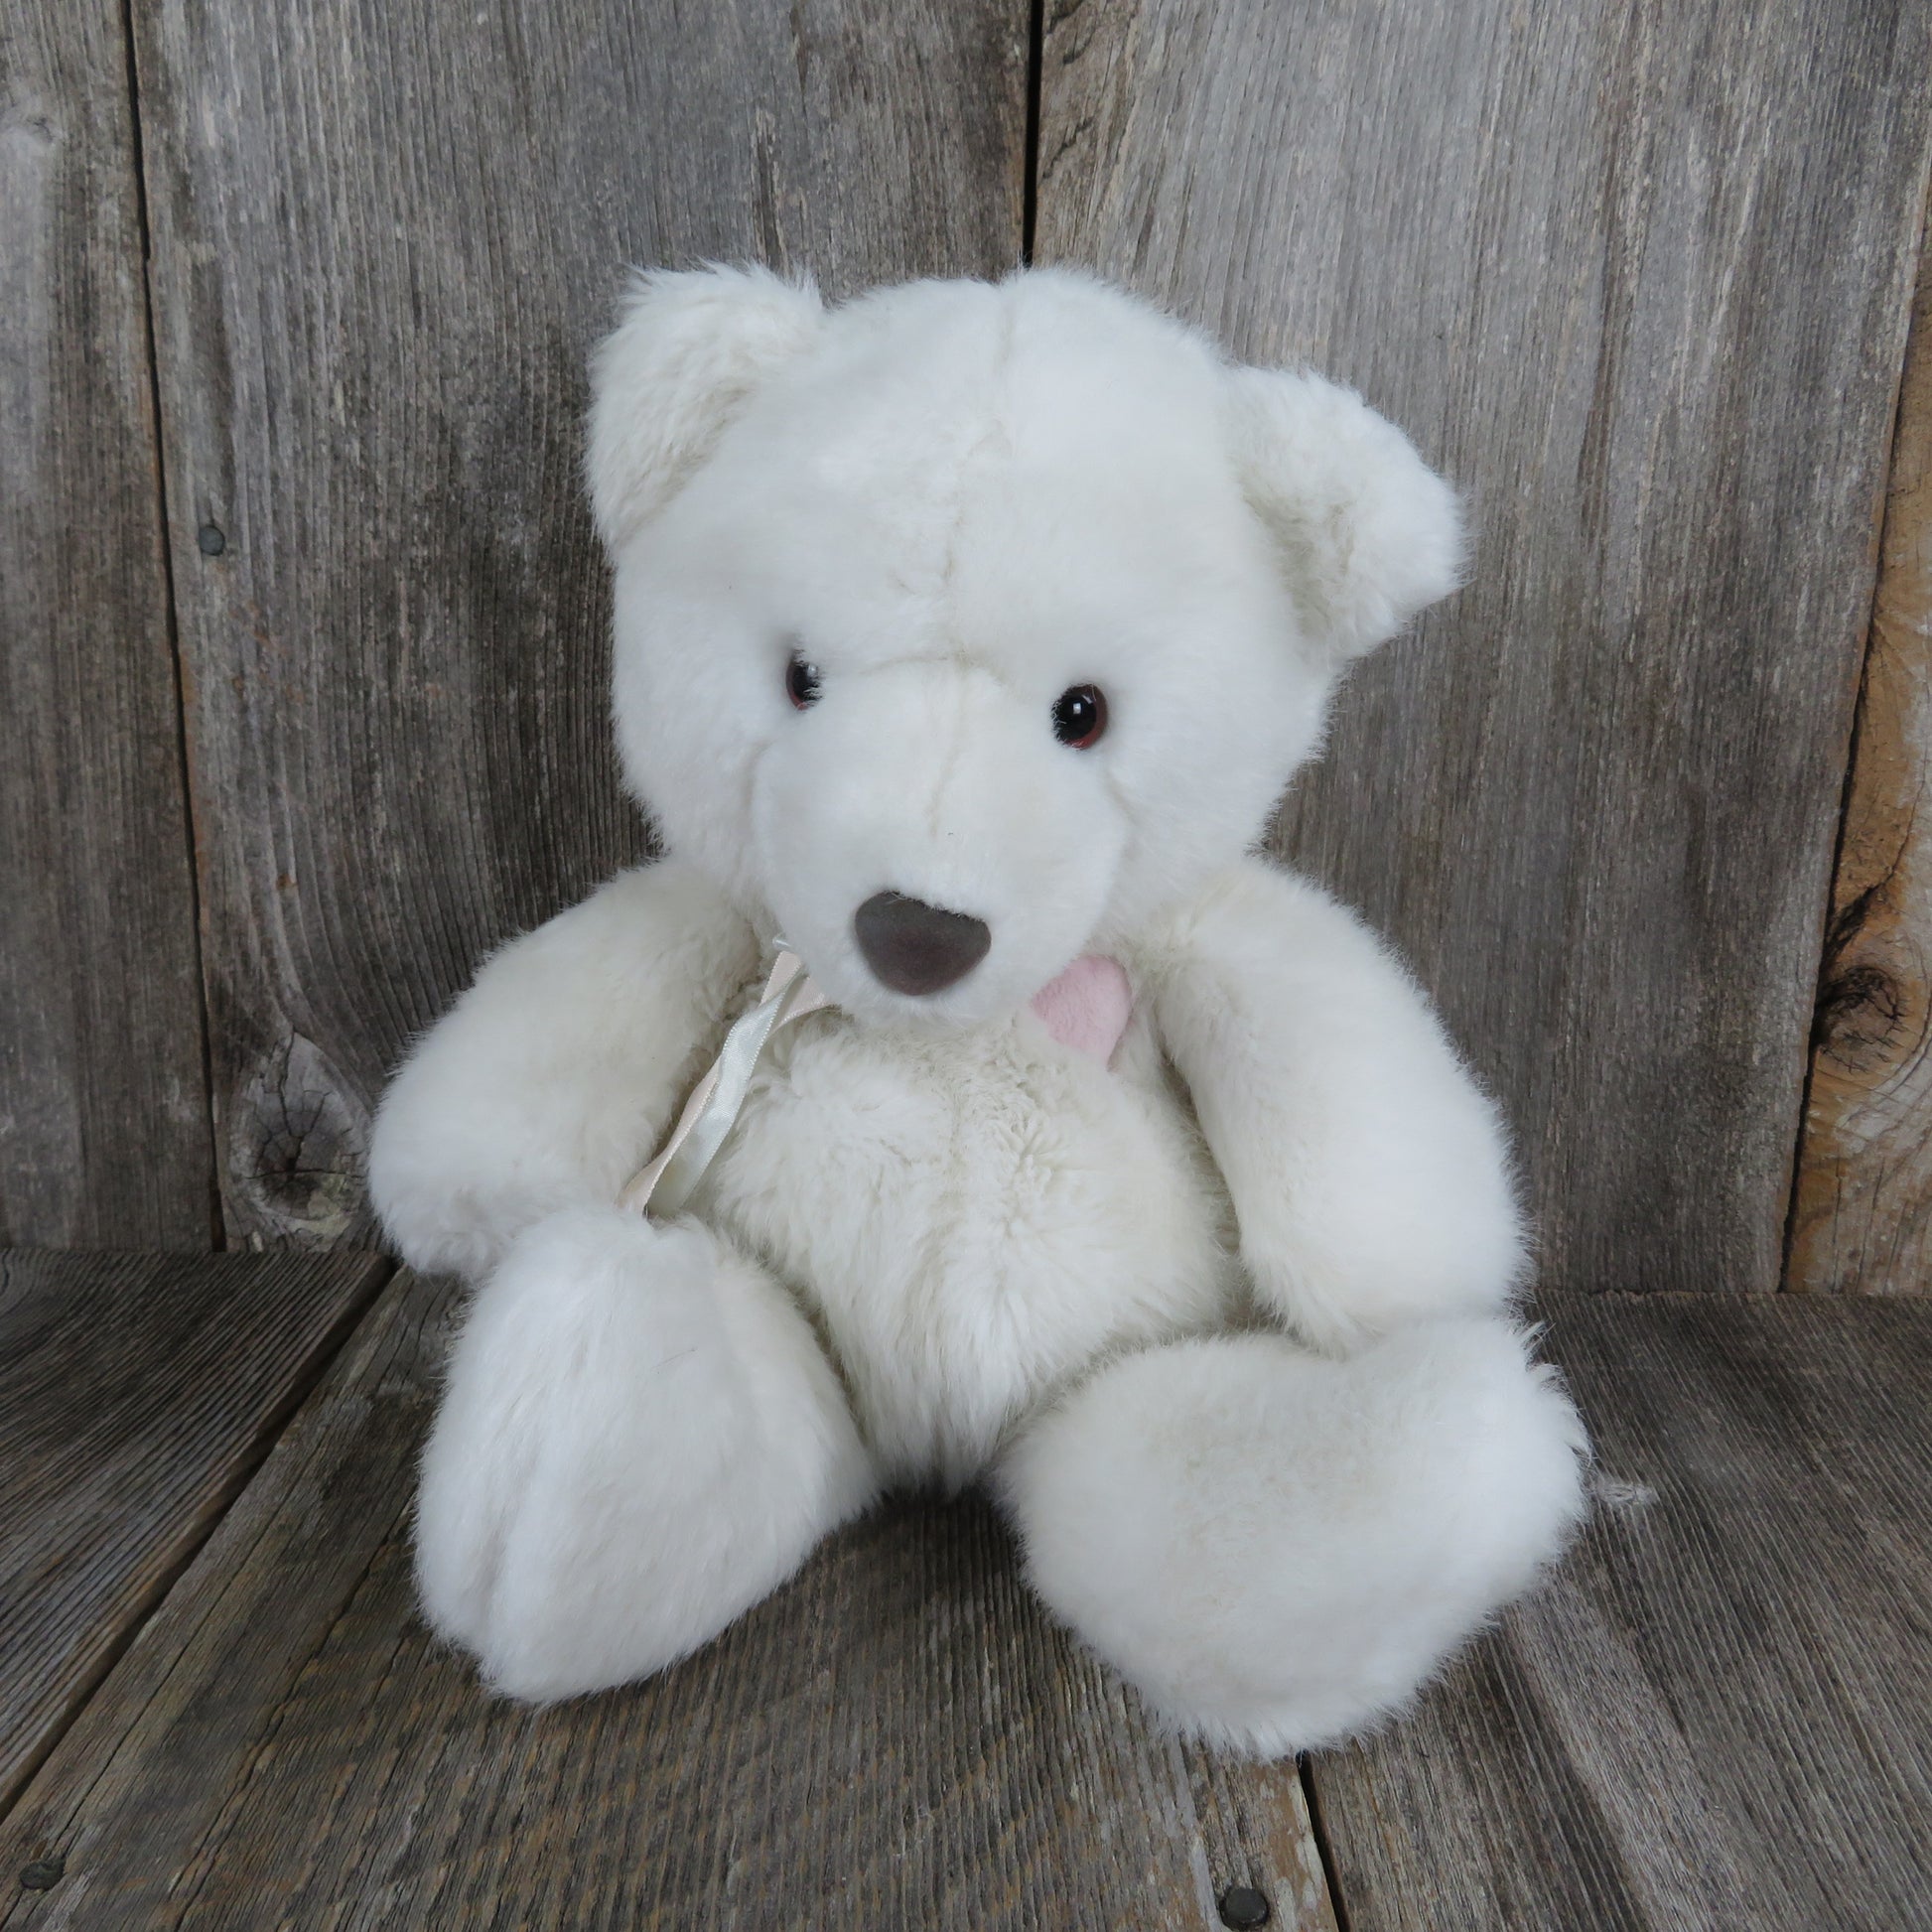 Vintage White Teddy Bear with Pink Heart Dakin 1990 Ribbon Bow Grey Flocked Nose Soft Floppy Limbs Gray - At Grandma's Table